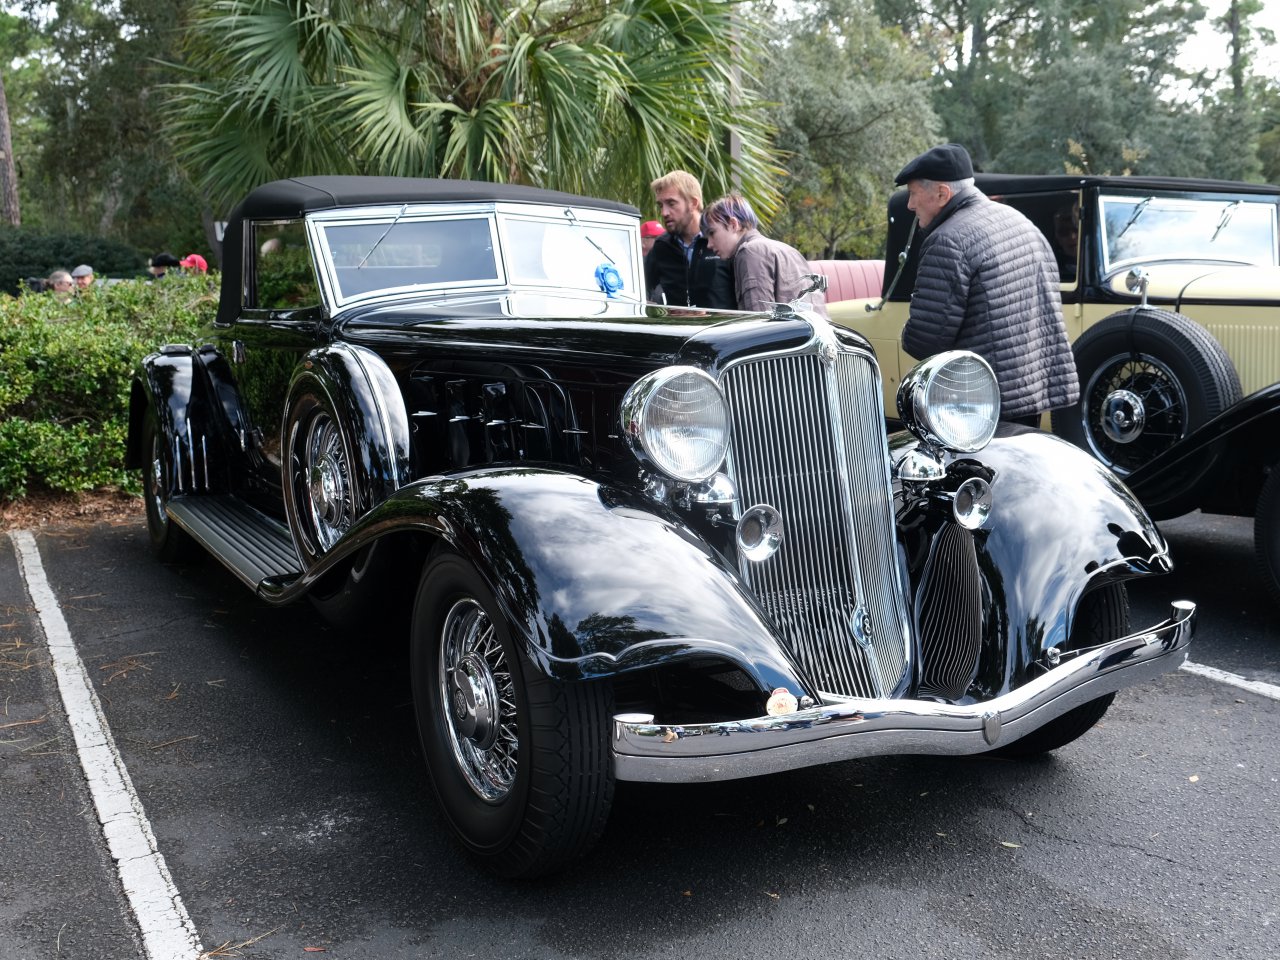 Hilton Head, Hilton Head again overcomes challenges to stage first-class concours, ClassicCars.com Journal